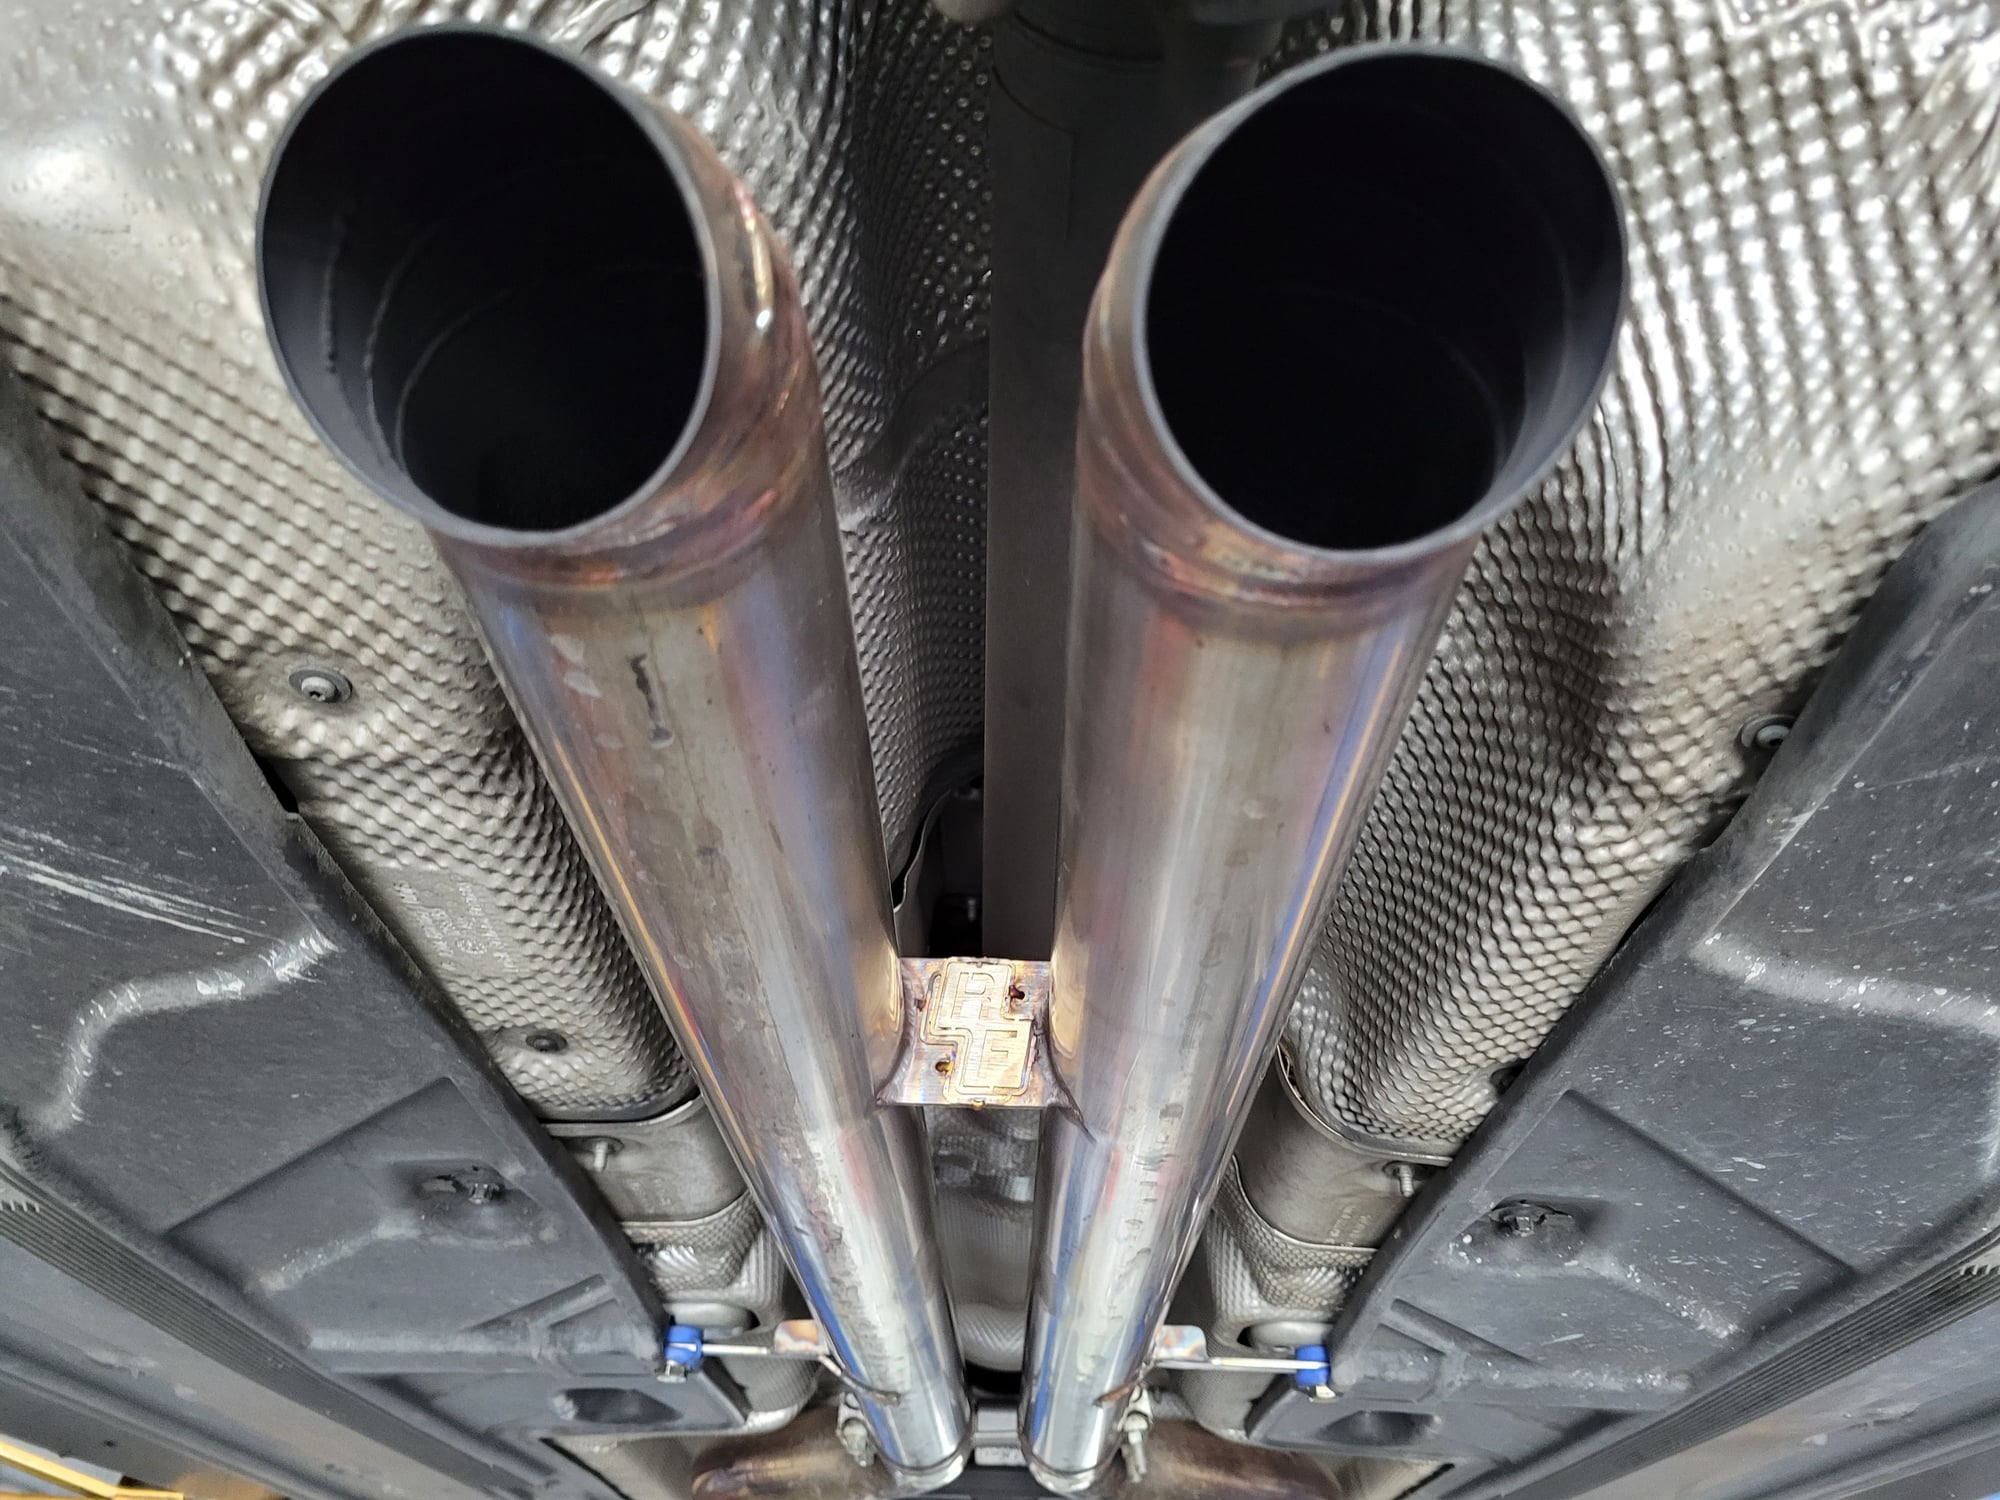 Engine - Exhaust - W204 C63 Bespoke Race Pipes - Used - 2008 to 2015 Mercedes-Benz C63 AMG - Santa Clara, CA 95050, United States